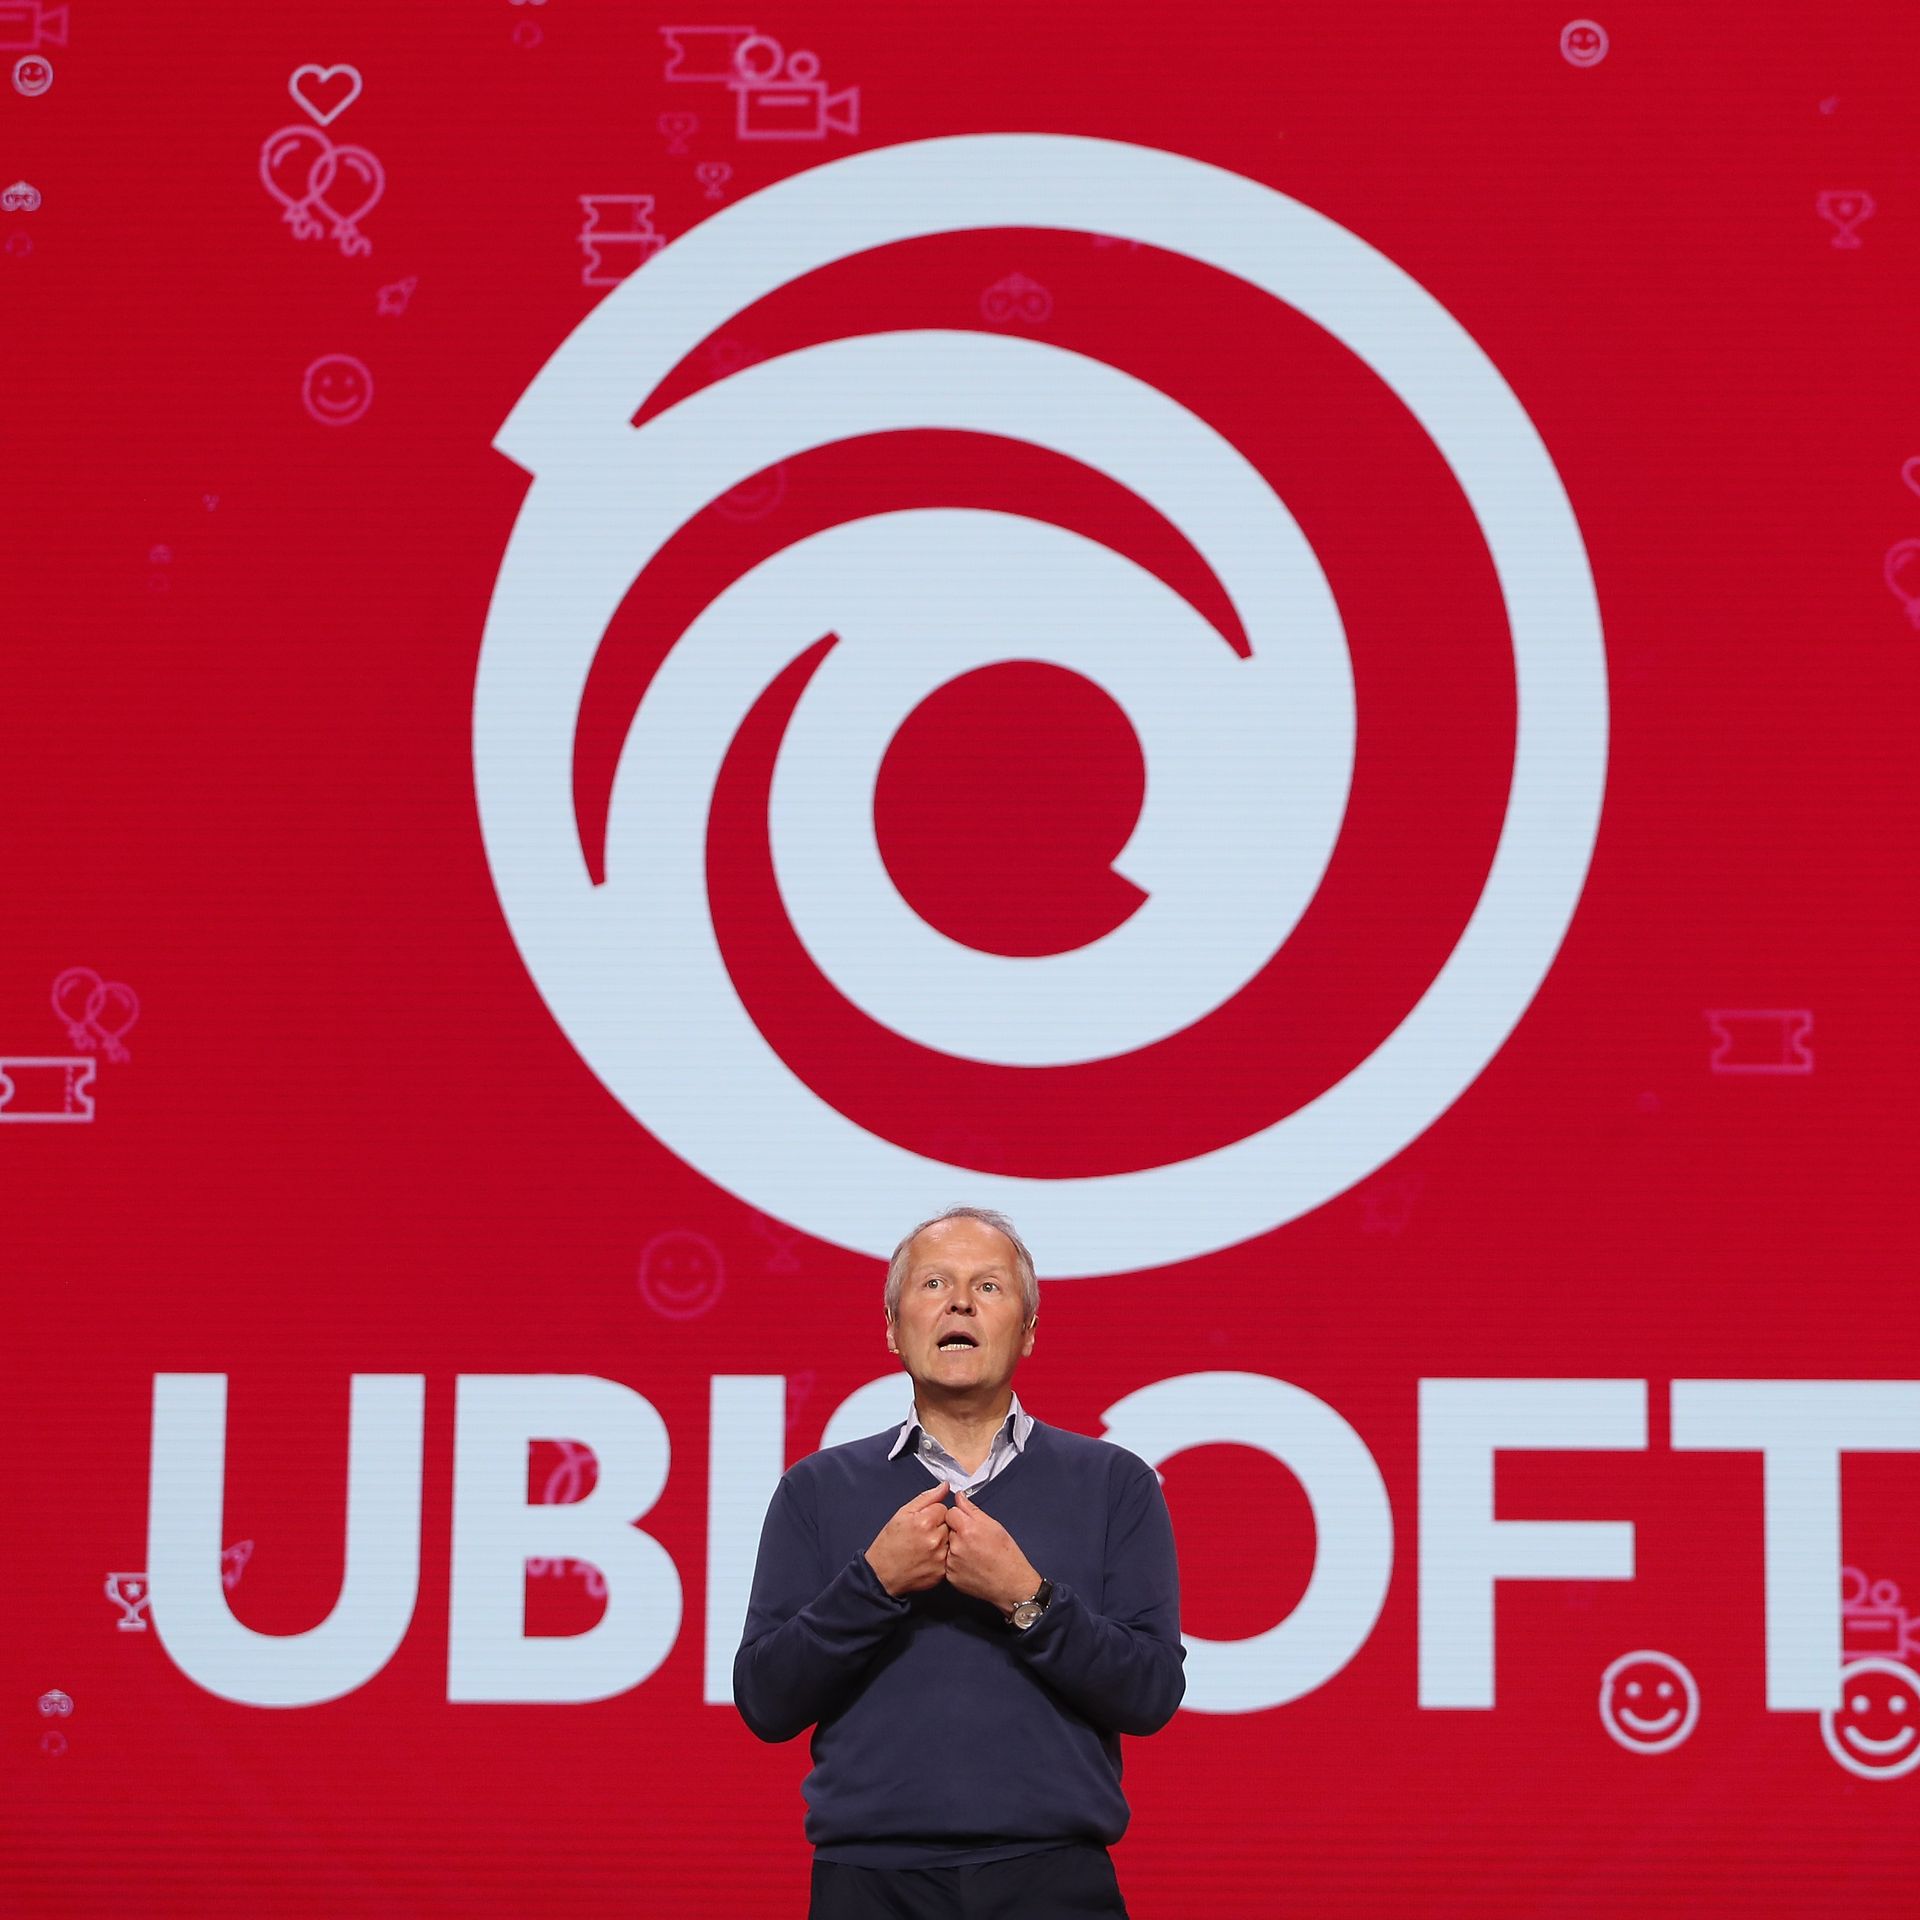 Photo of a man in pants, sweater, and a collard shirt standing in front of a big version of the Ubisoft logo